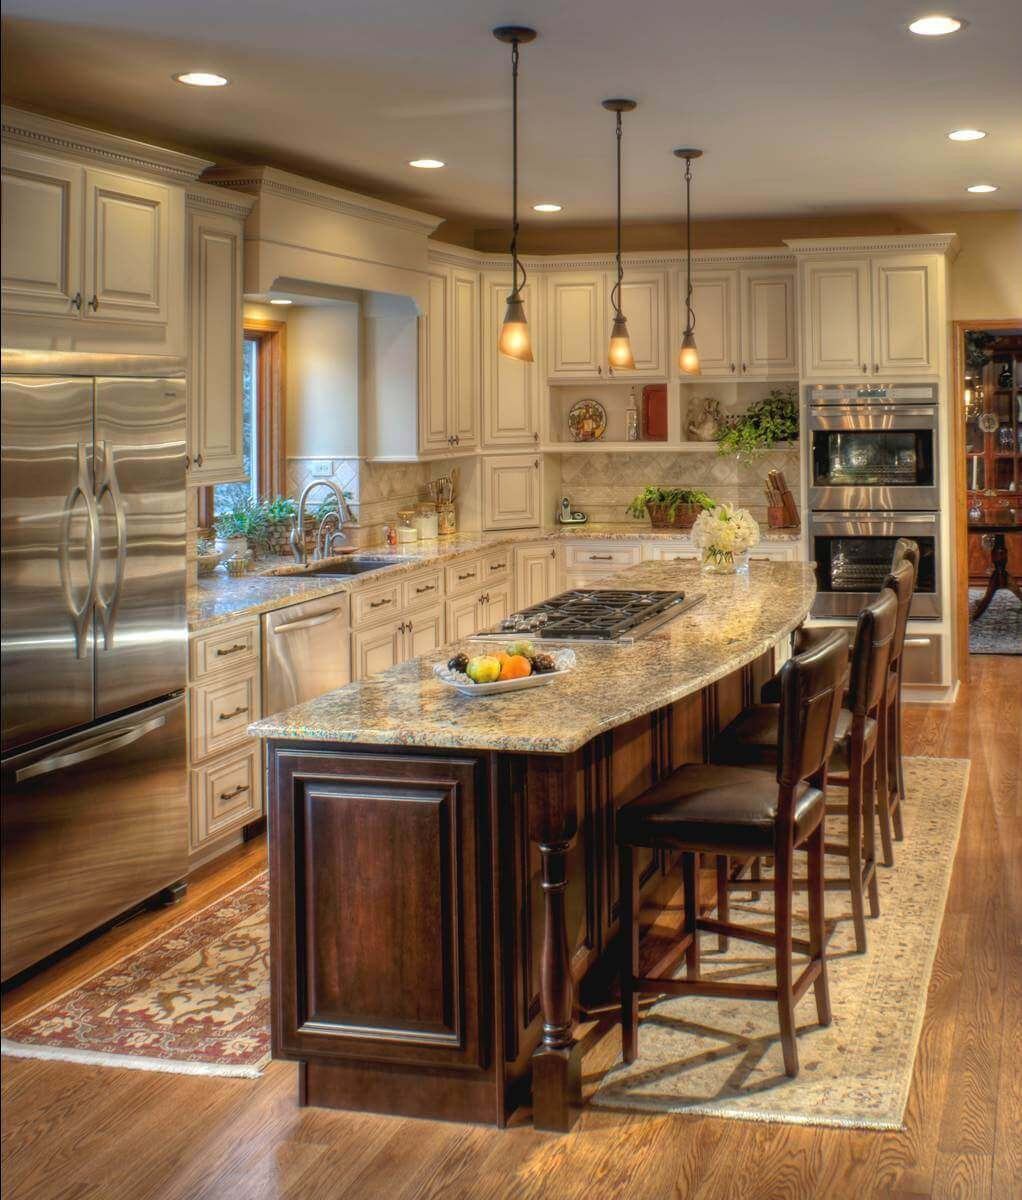 Rustic Kitchen Island With Seating
 68 Deluxe Custom Kitchen Island Ideas Jaw Dropping Designs